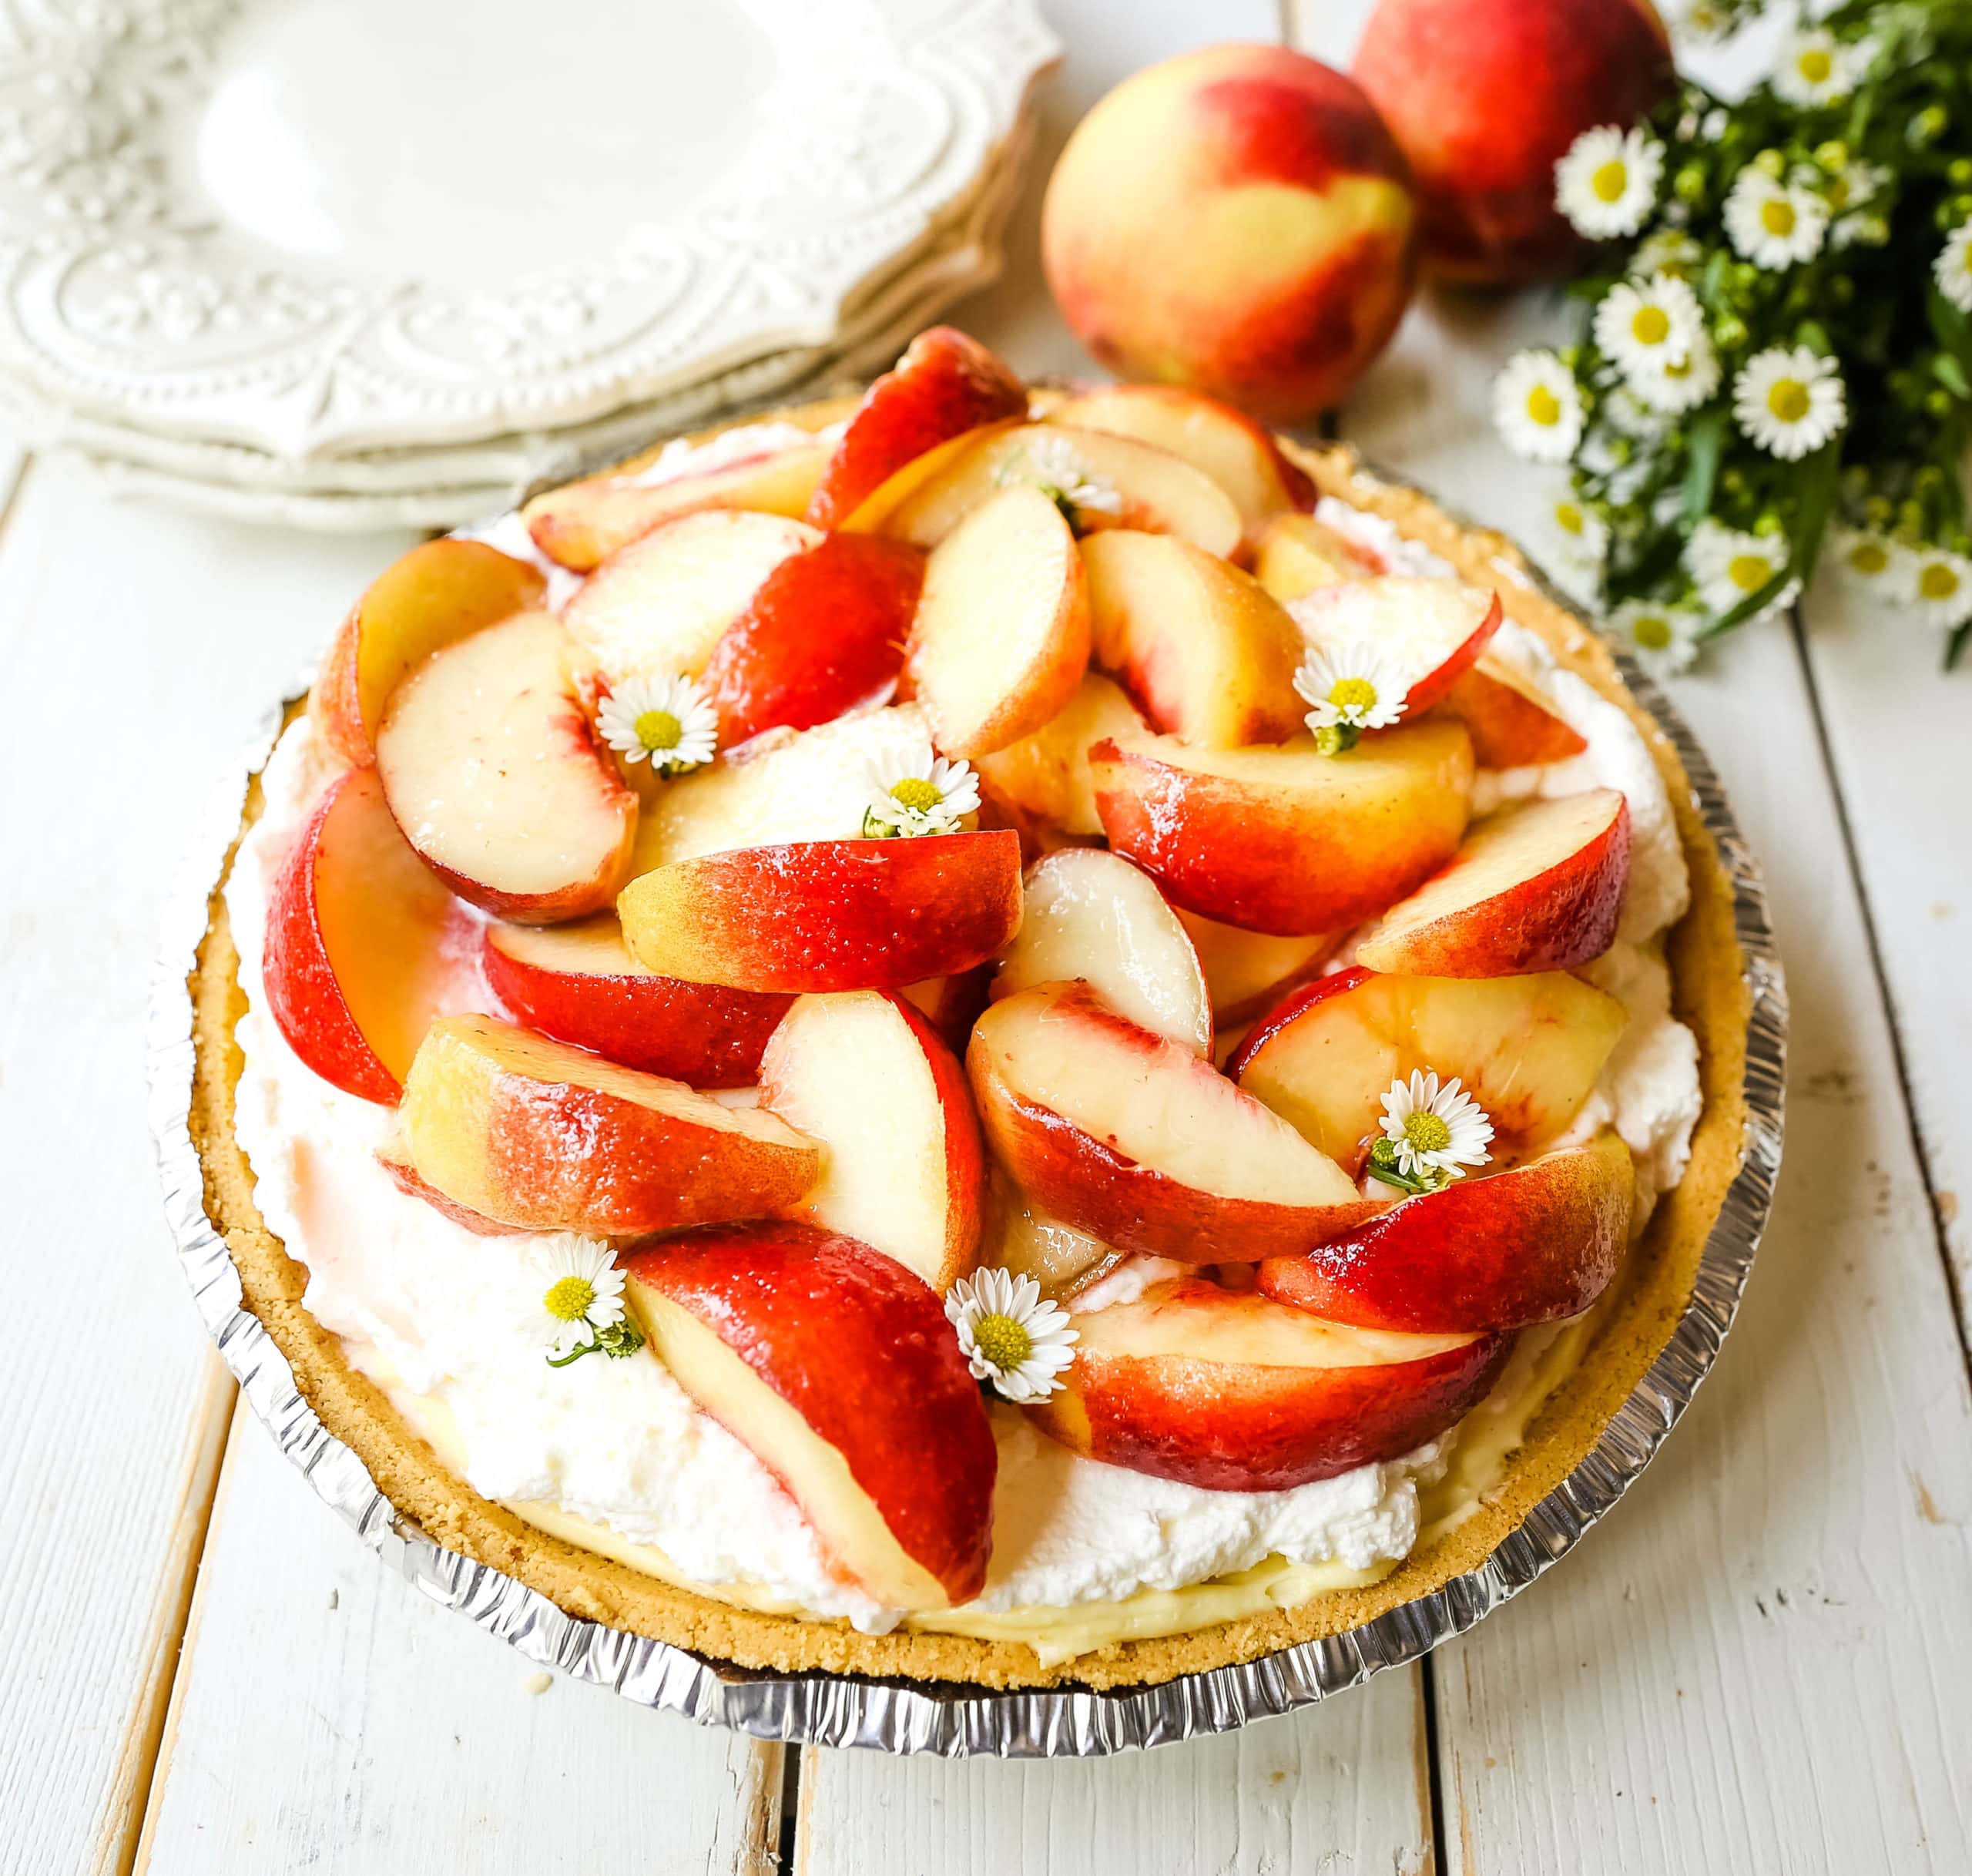 Peaches and Cream Pie. A quick and easy no-bake creamy peach pie with a buttery graham cracker crust, a sweet custard filling, fresh whipped cream, and sliced peaches.  www.modernhoney.com #pie #nobakedessert #nobakepie #peachdessert #peaches #peach